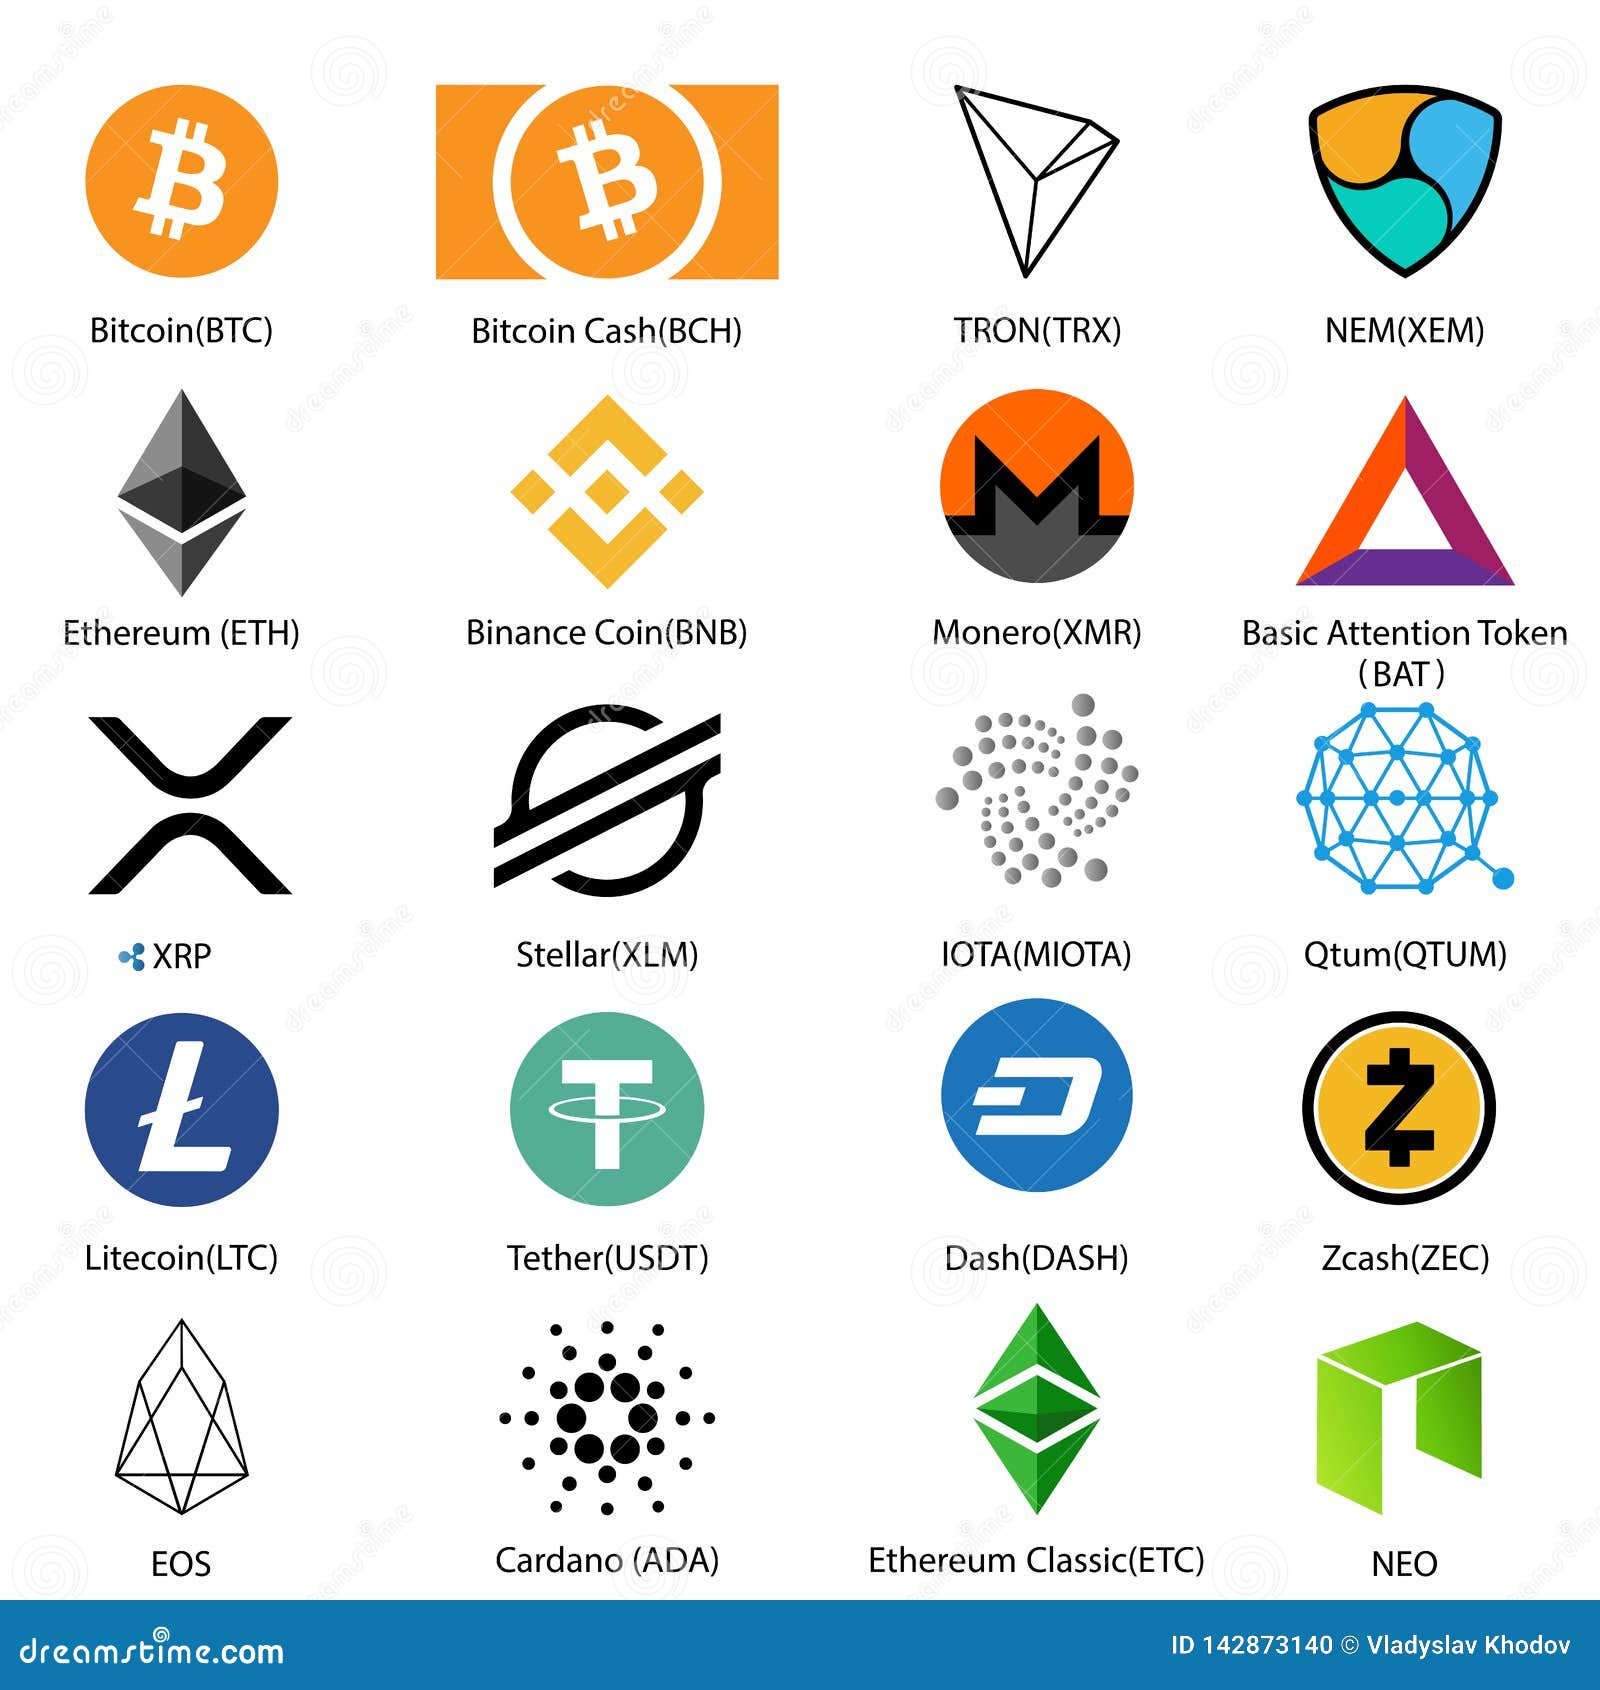 Cryptocurrency names ethereum uses explained